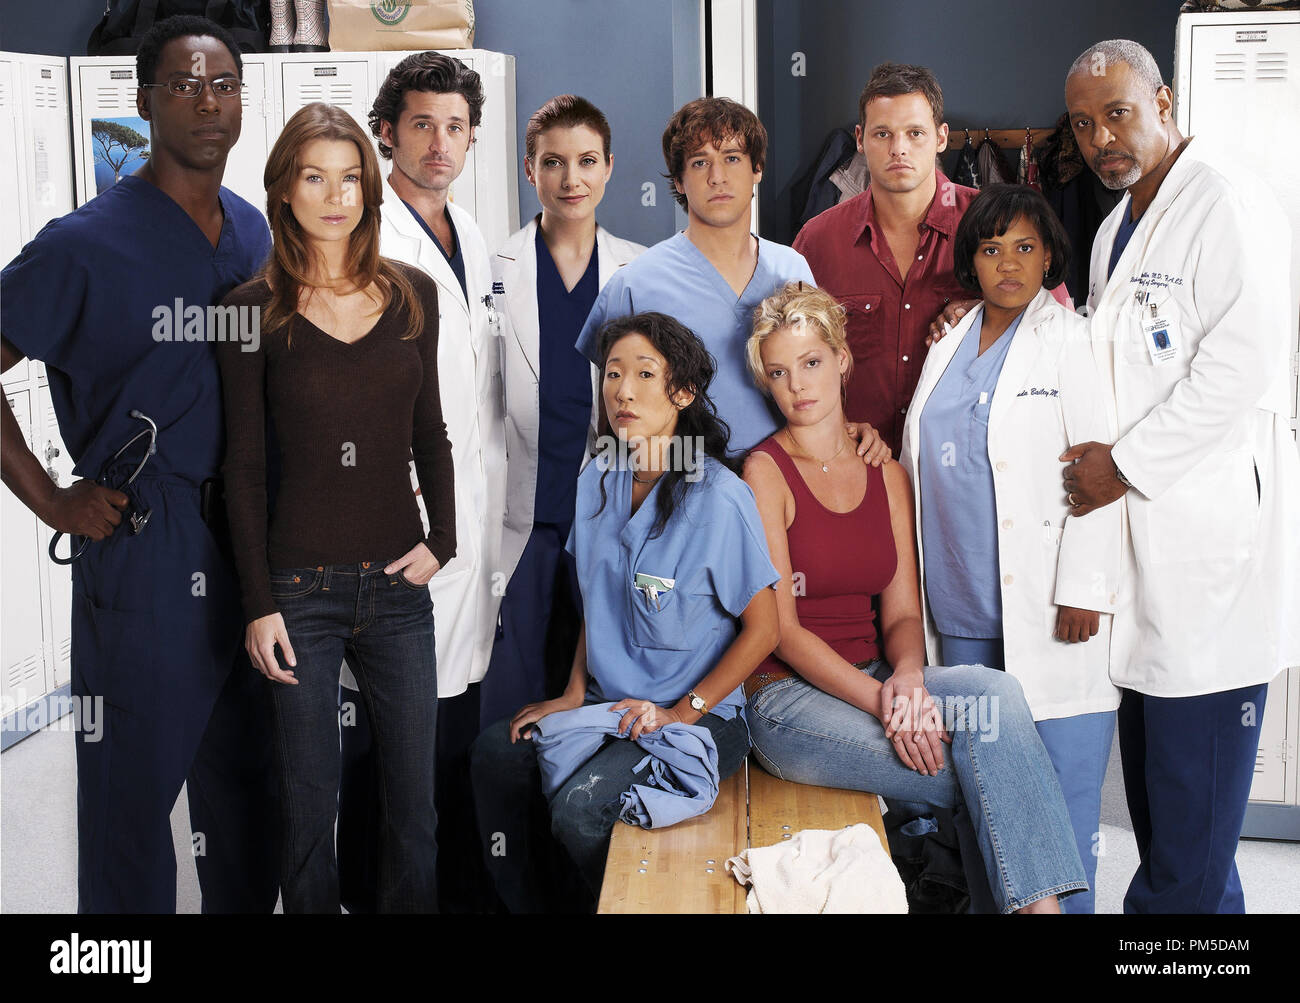 Film Still / Publicity Still from 'Grey's Anatomy'  Isaiah Washington, Ellen Pompeo, Patrick Dempsey, Kate Walsh, T.R. Knight, Sandra Oh, Katherine Heigl, Justin Chambers, Chandra Wilson, James Pickens Jr. 2005  File Reference # 30736293THA  For Editorial Use Only -  All Rights Reserved Stock Photo